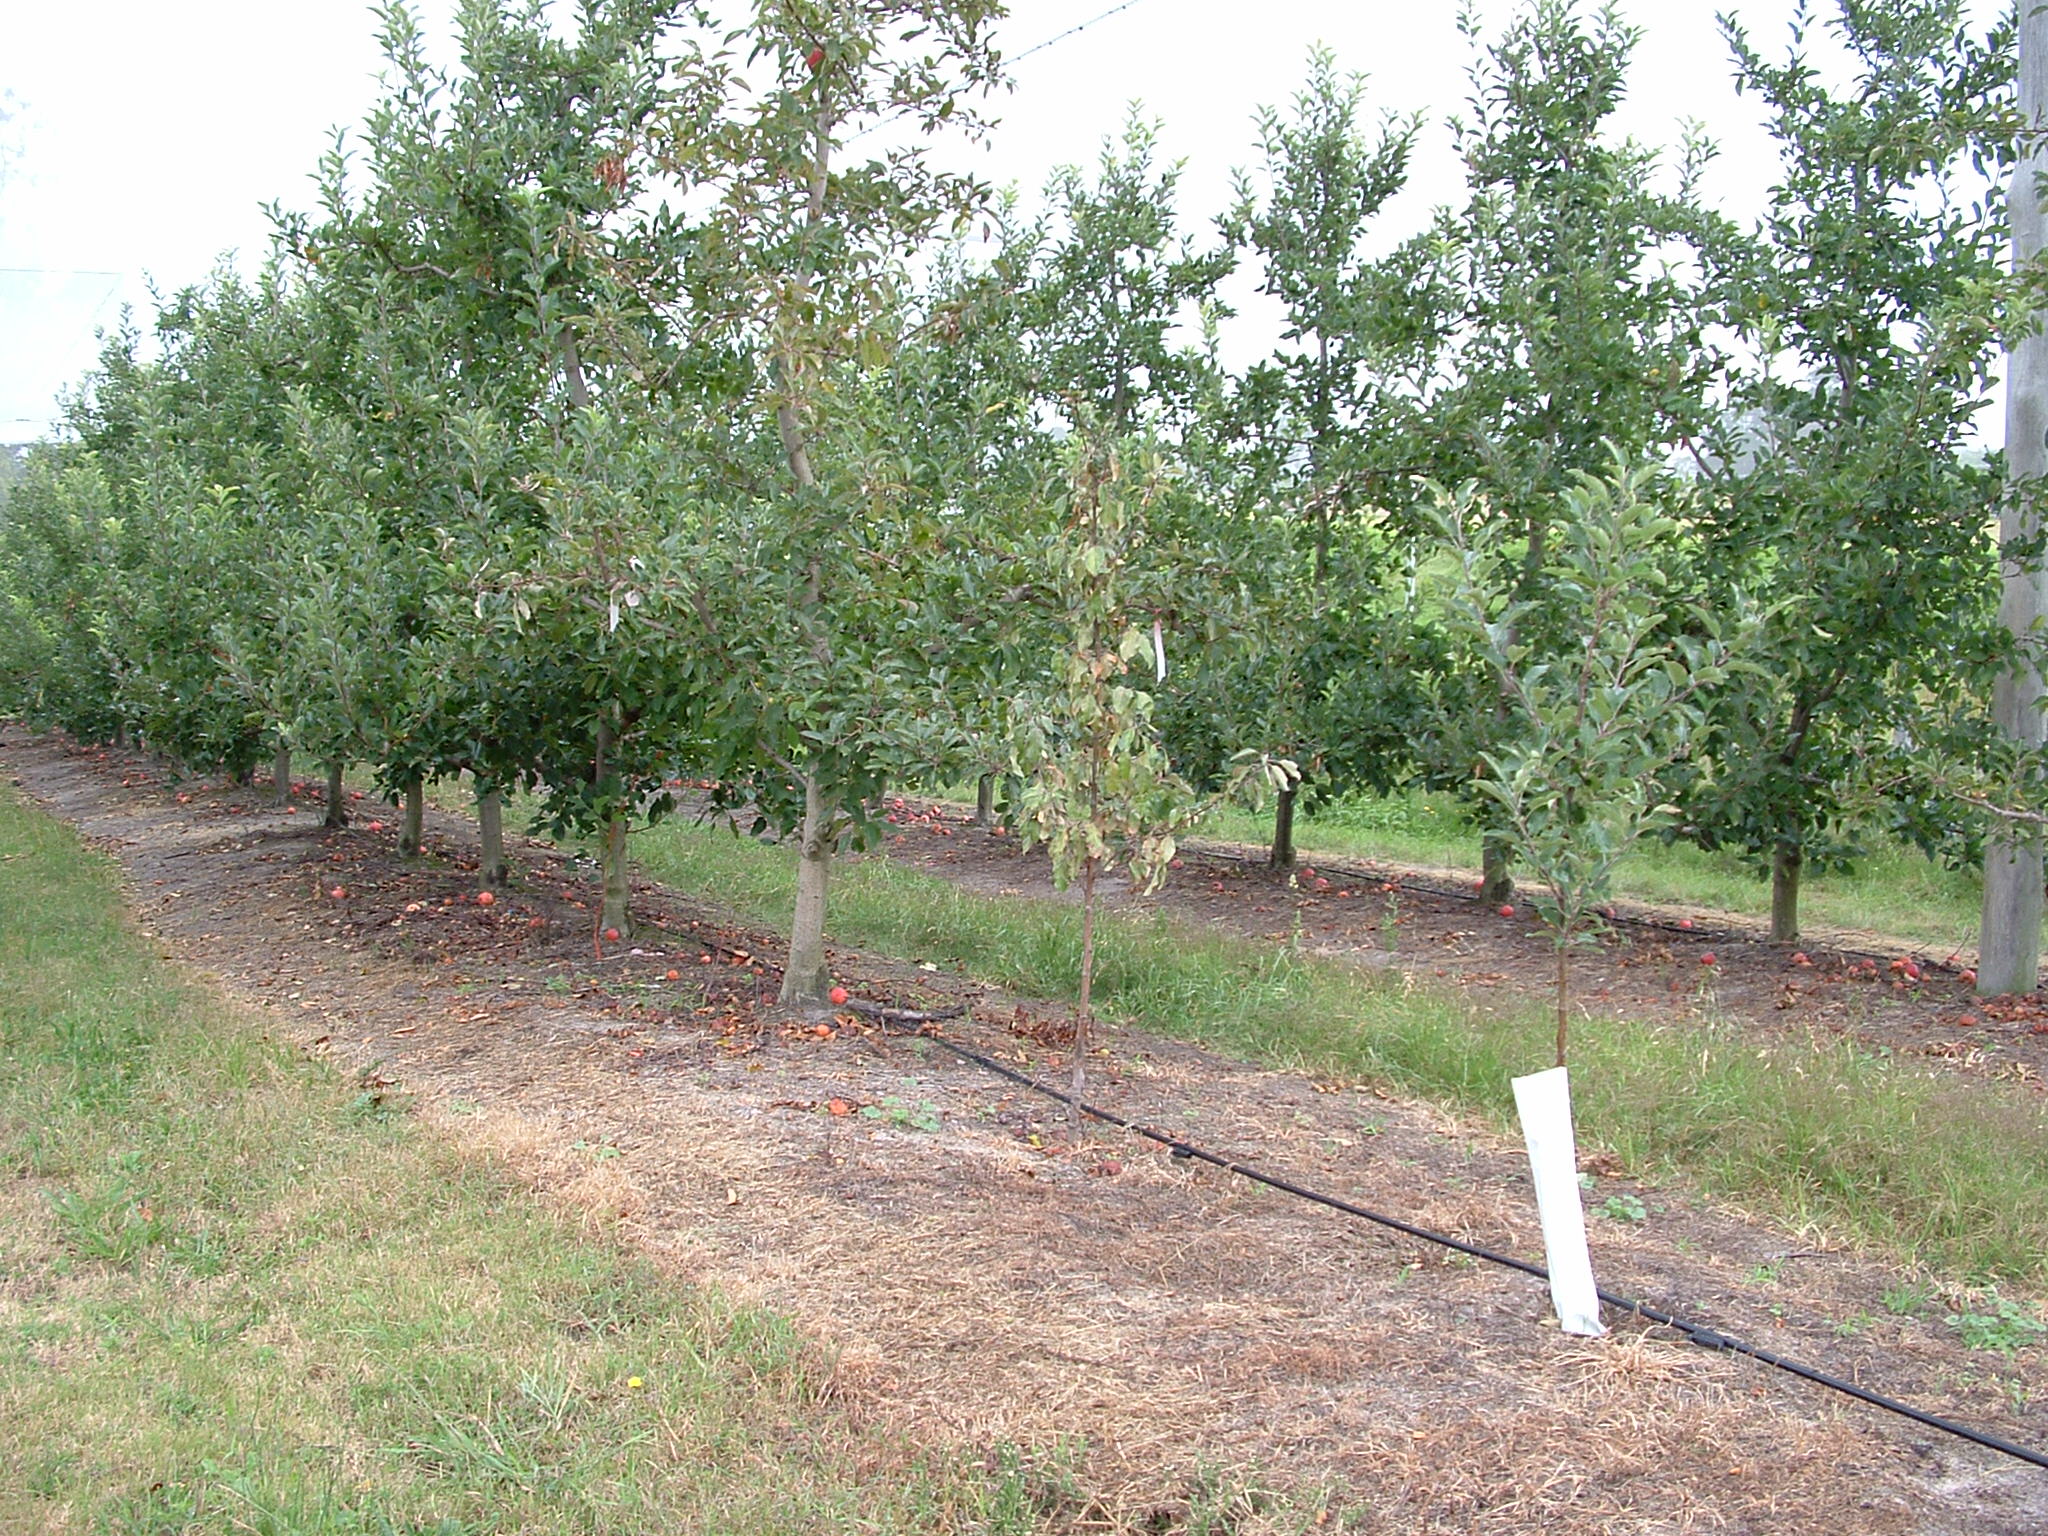 Young wilted tree in a row of larger healthy trees in an apple orchard